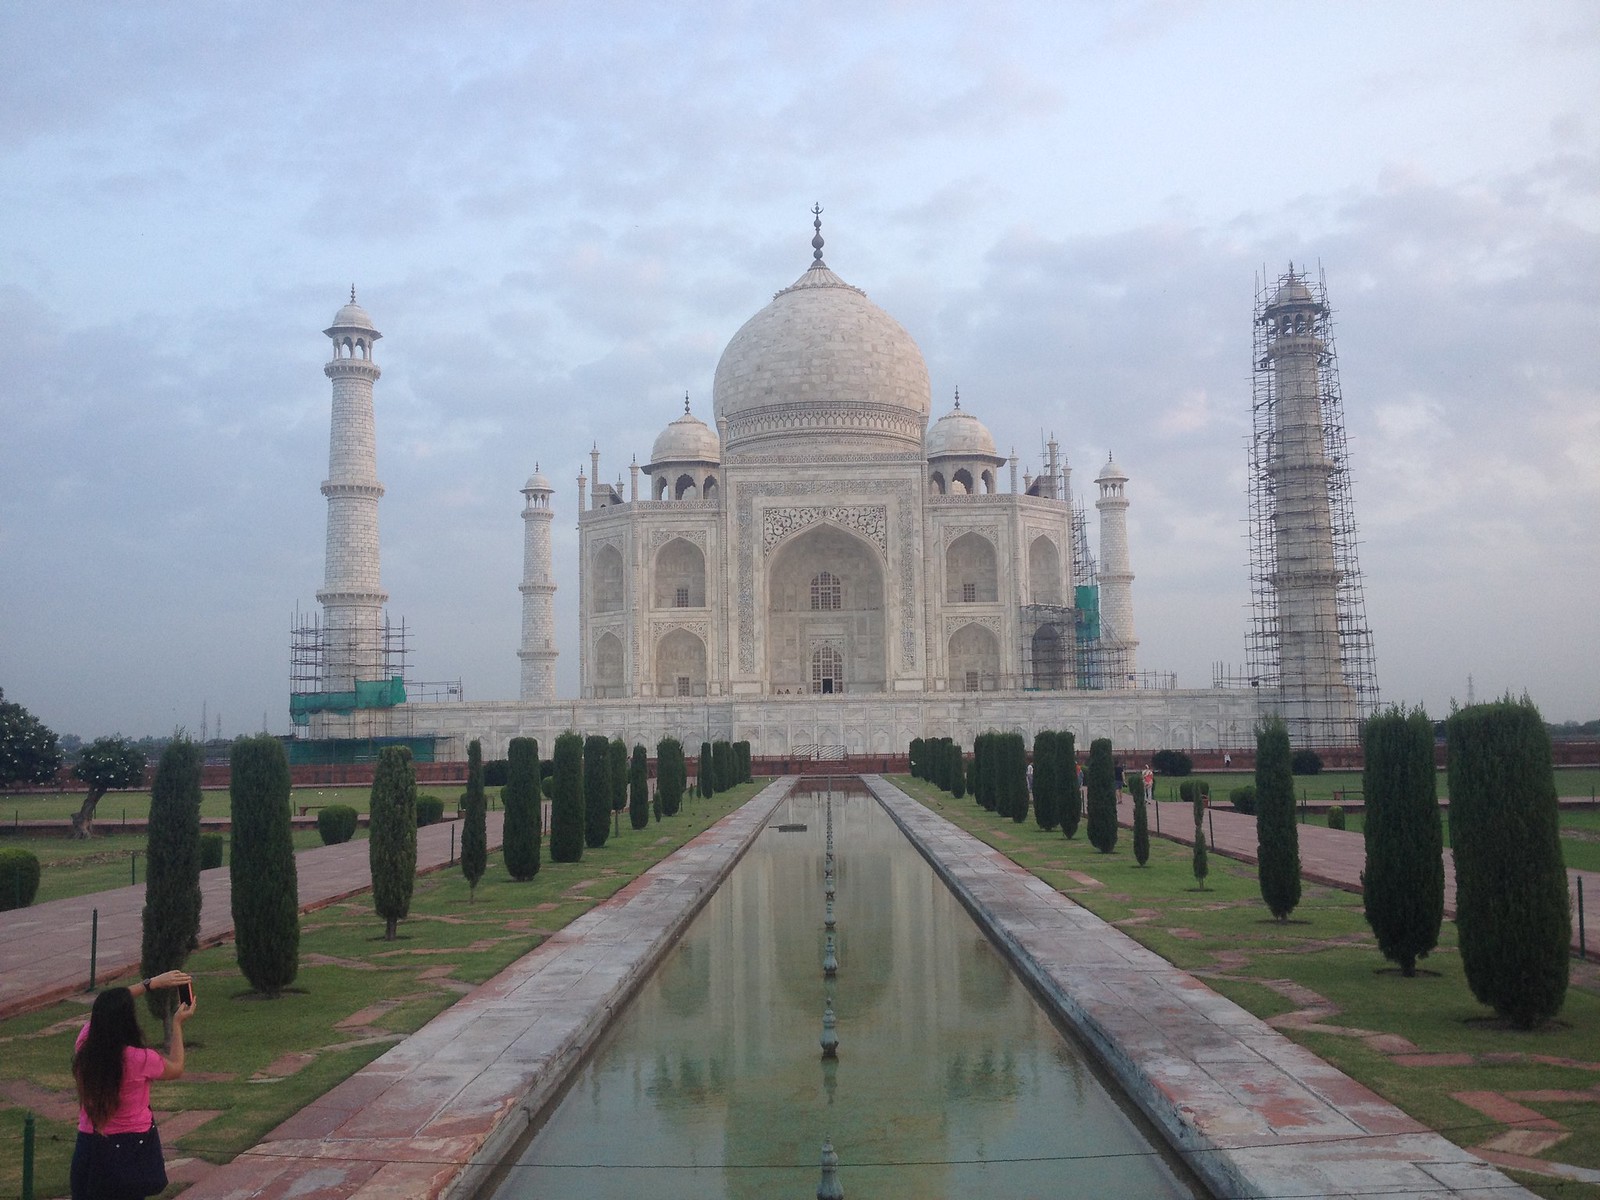 Visit the Taj Mahal using Ultimate Rewards points from Chase